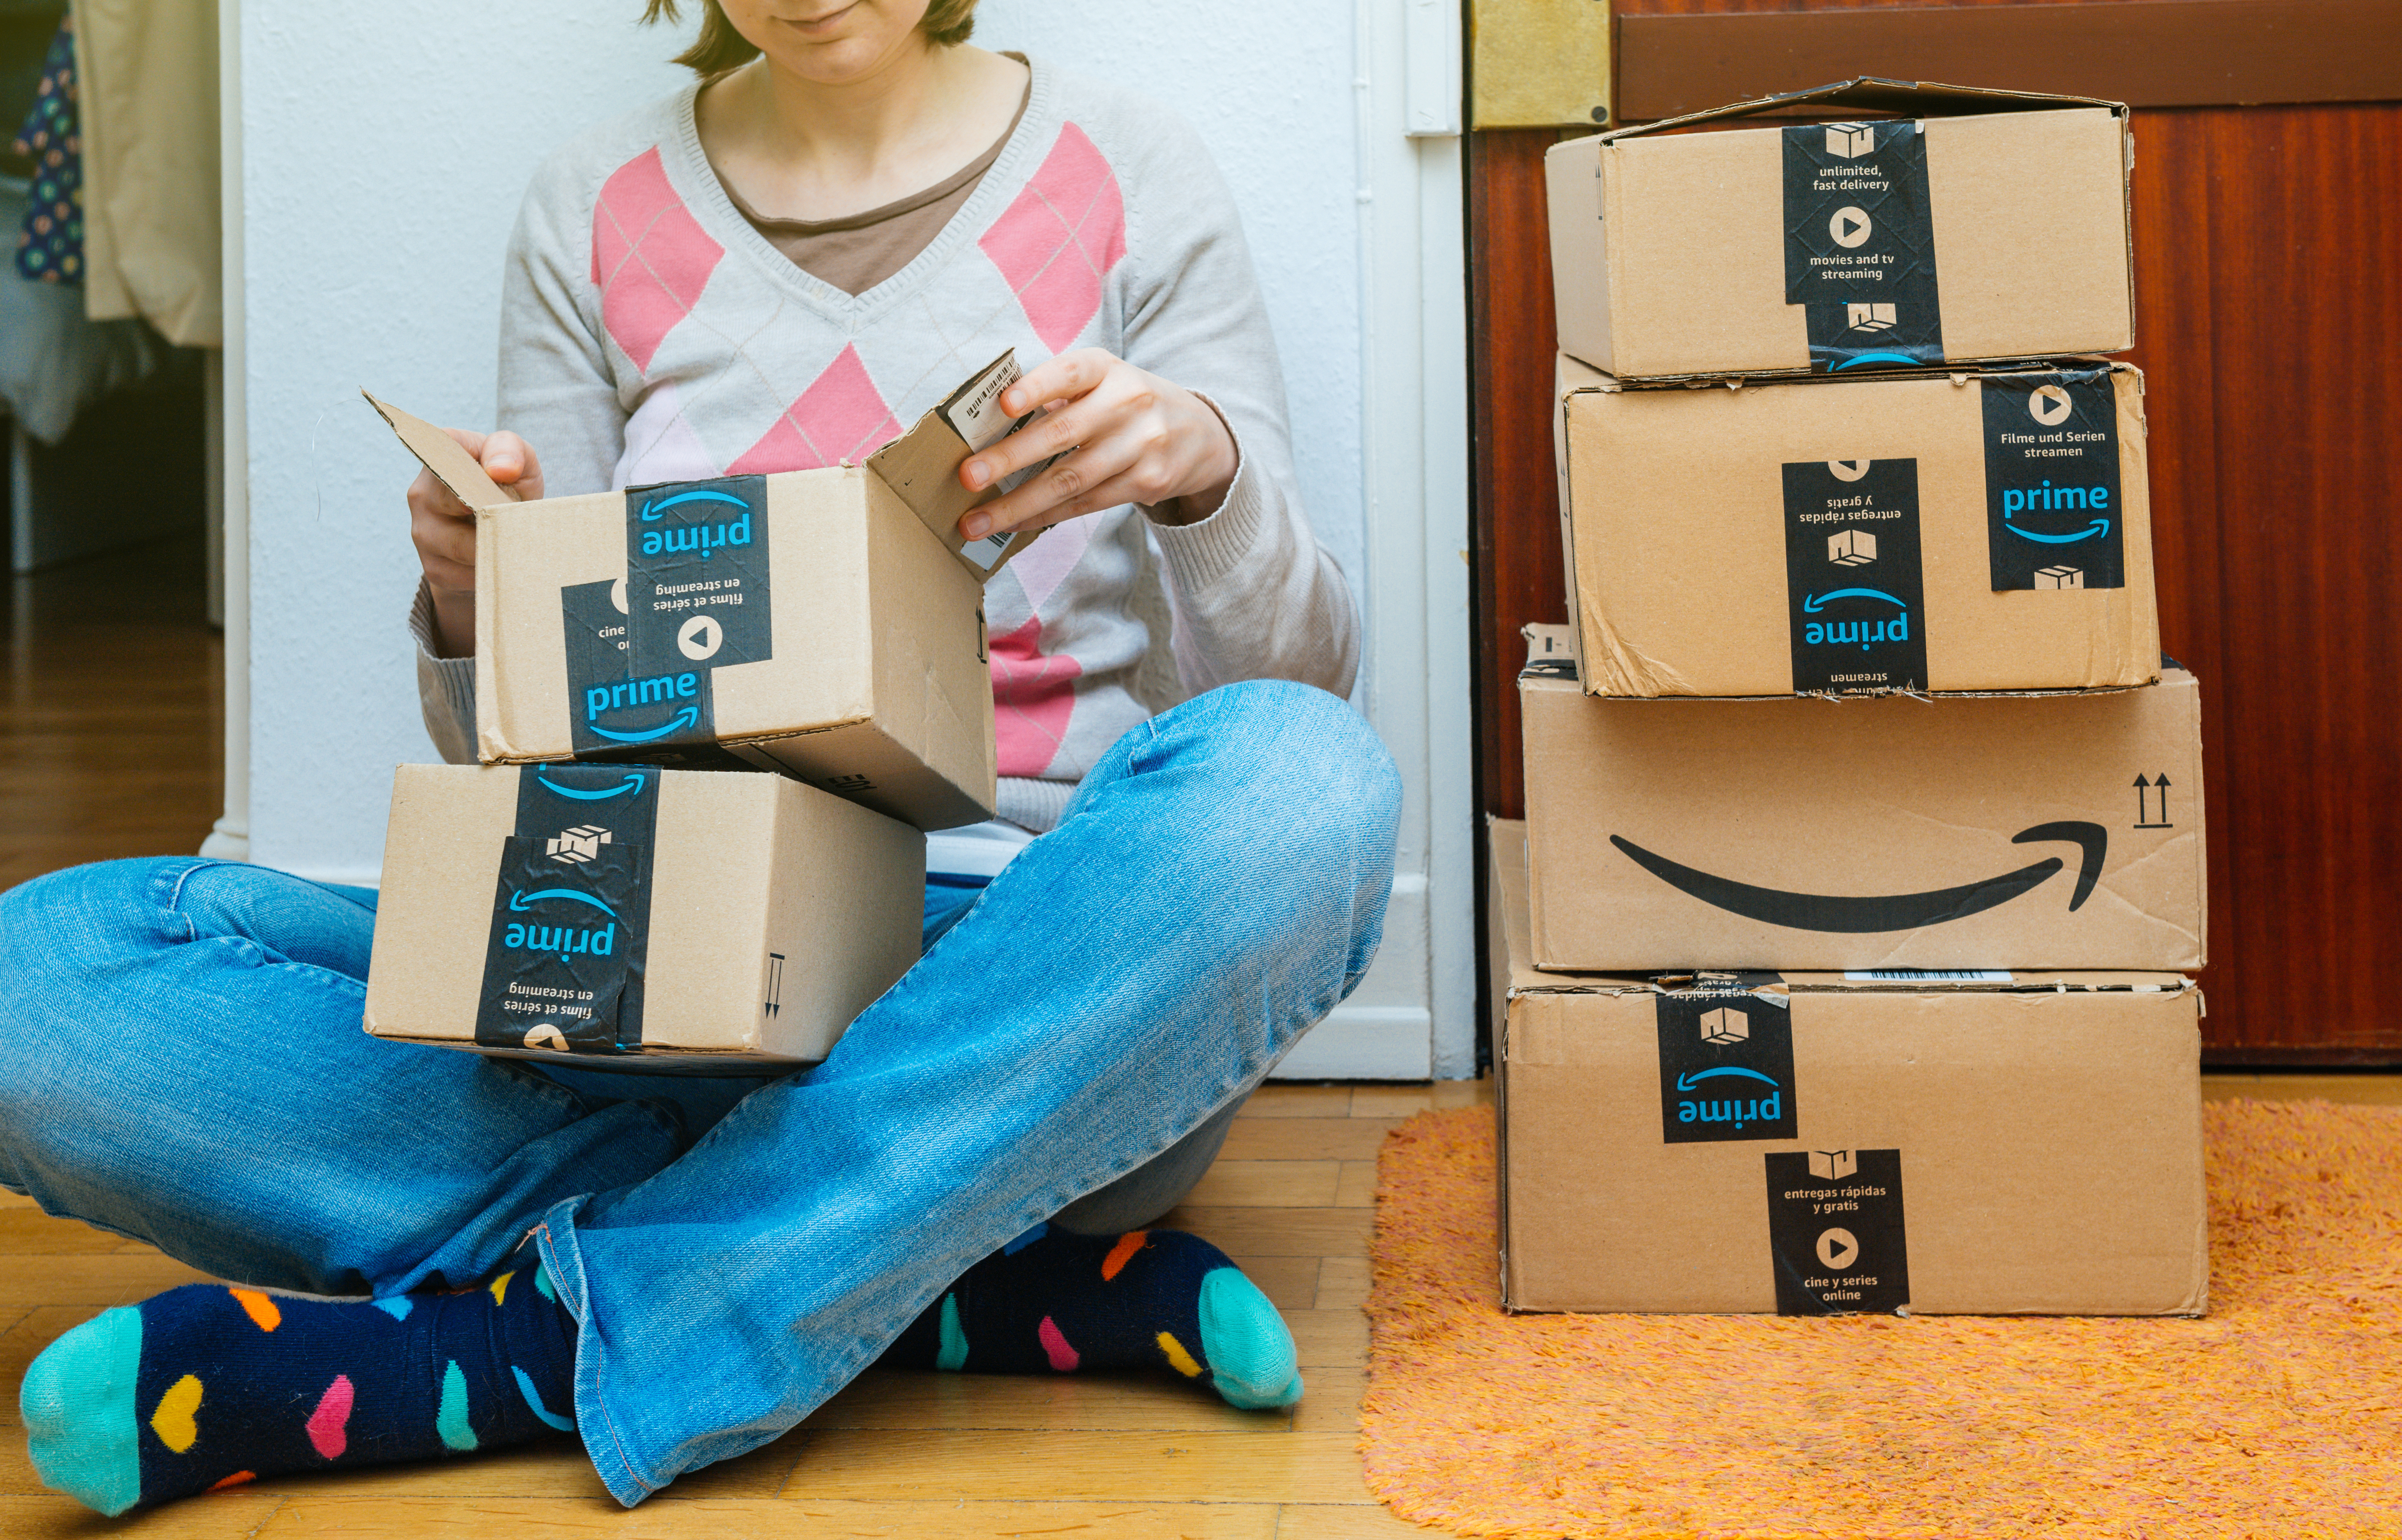 Woman sitting on the ground opening Amazon Prime boxes